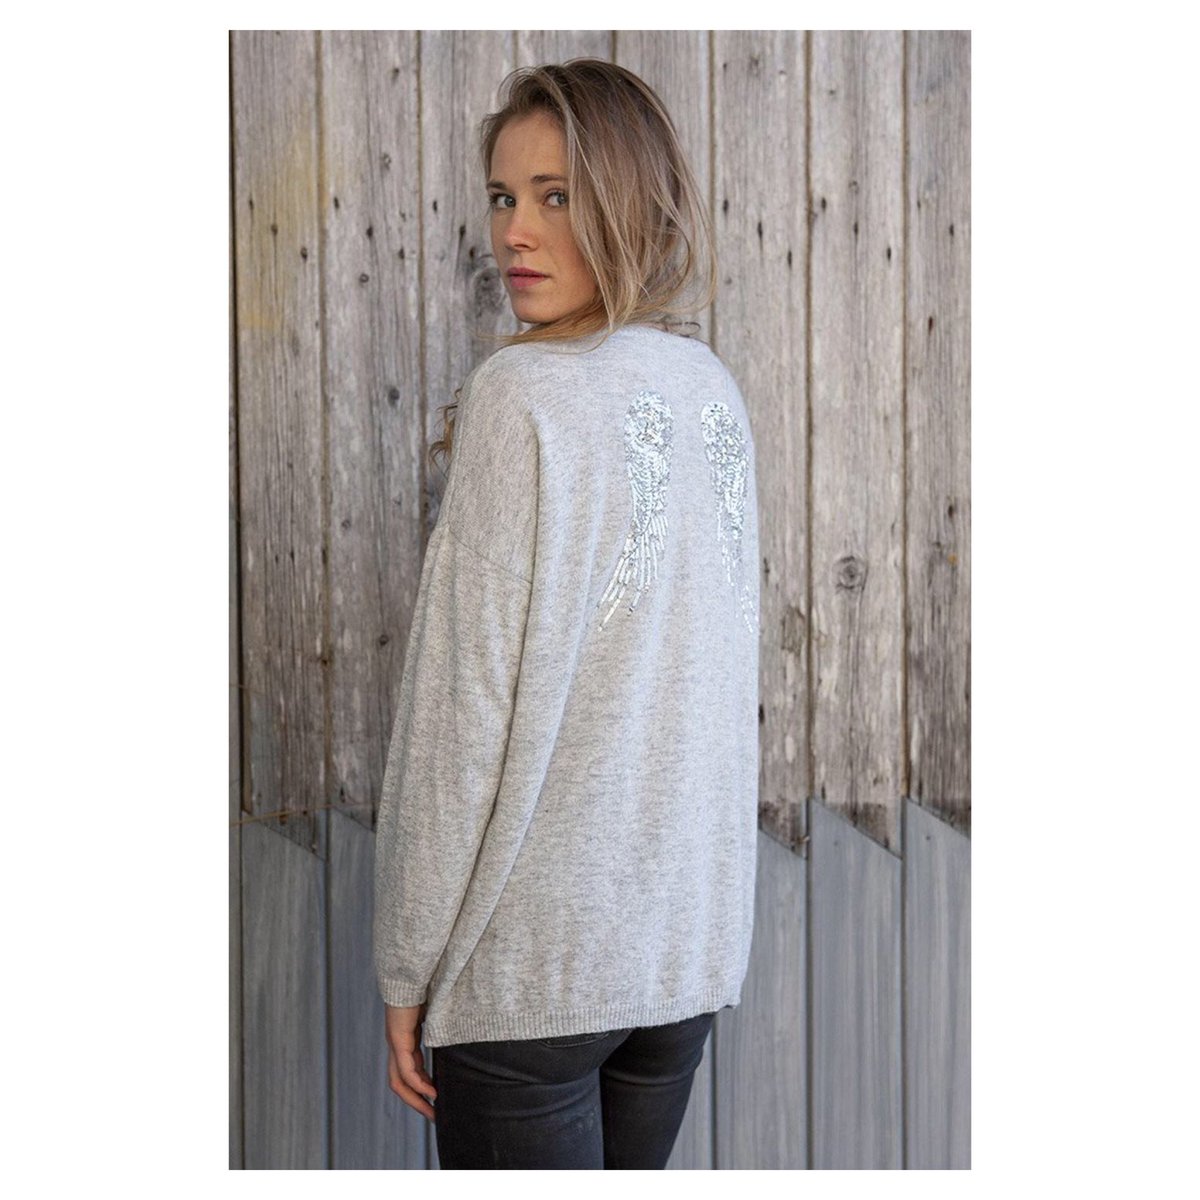 You’ll adore Angel wings Cashmere Sweater! It’s perfect dressed up for smart or styled down with jeans, it’s a must have this season.

downyourhighstreet.com/angel-wings-ca…

#Cashmere #CashmereSweater #AngelWingsSweater #AngelWings #IndependentBusiness #ShopLocal #SupportLocal #DYHS #RT